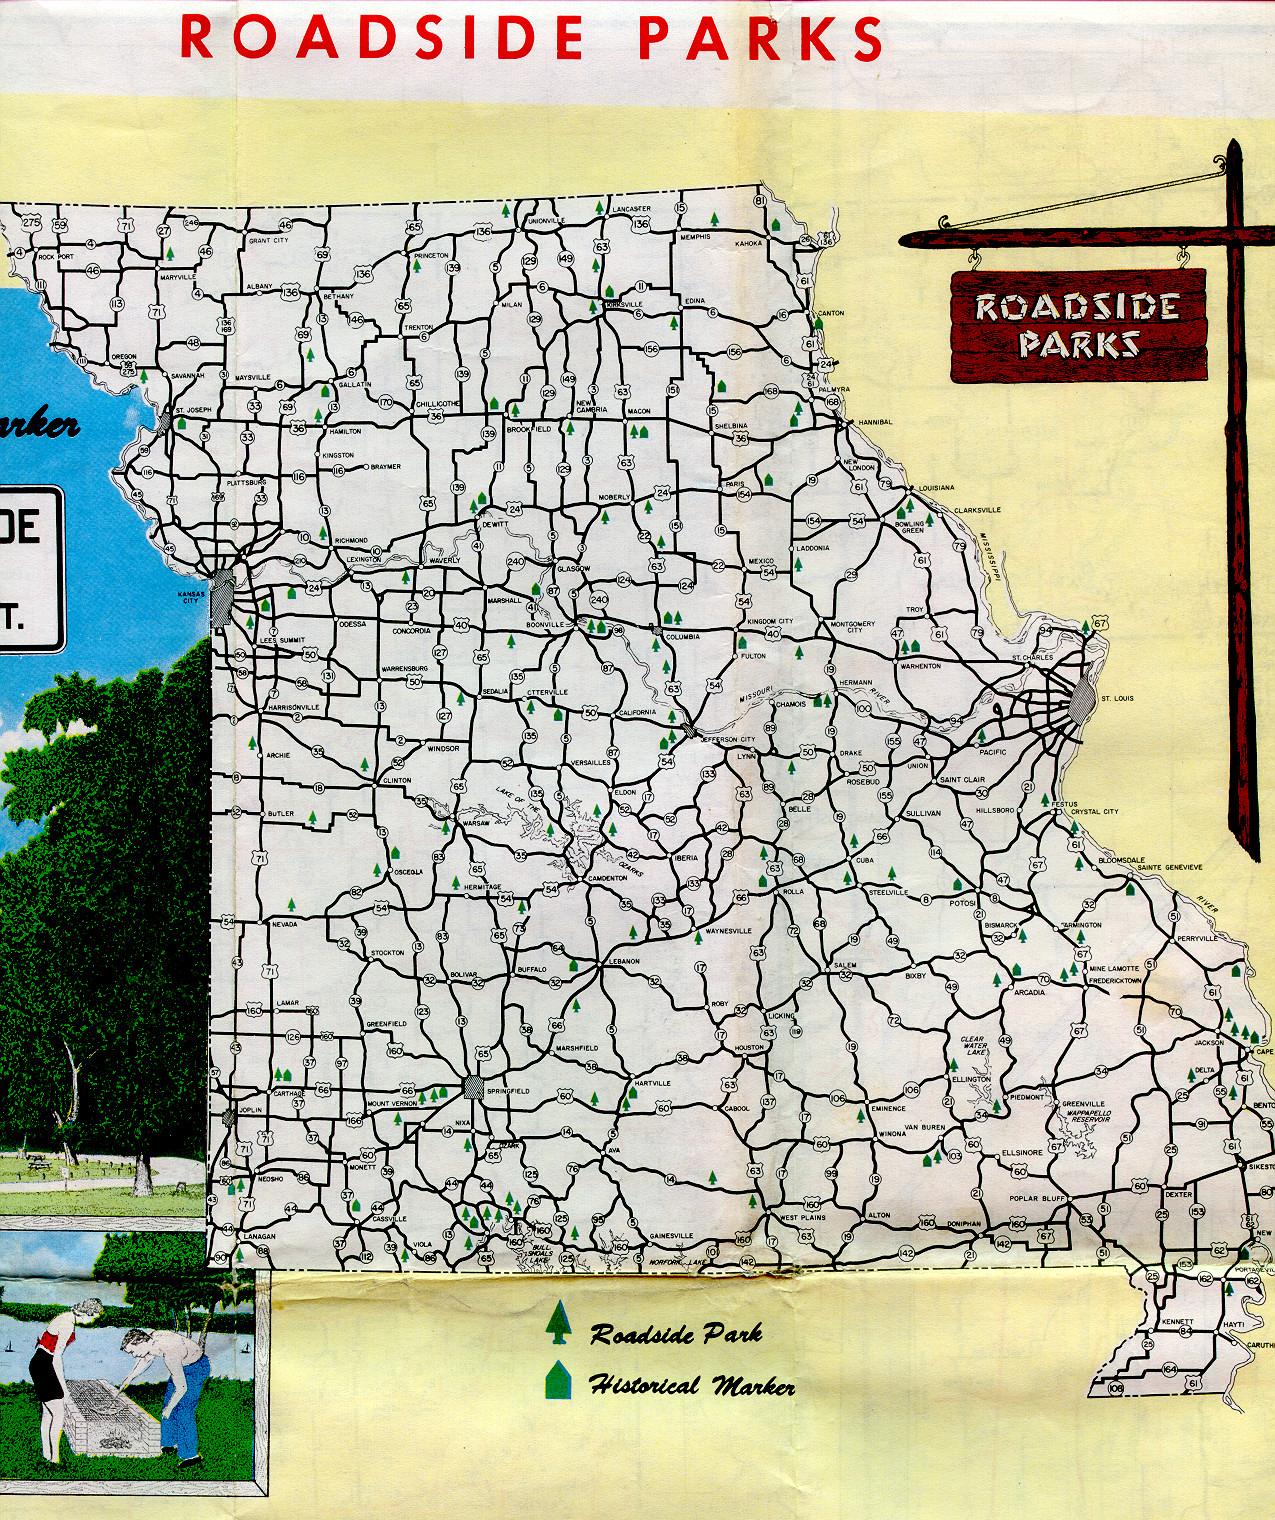 Section of 1957 official highway map for Missouri